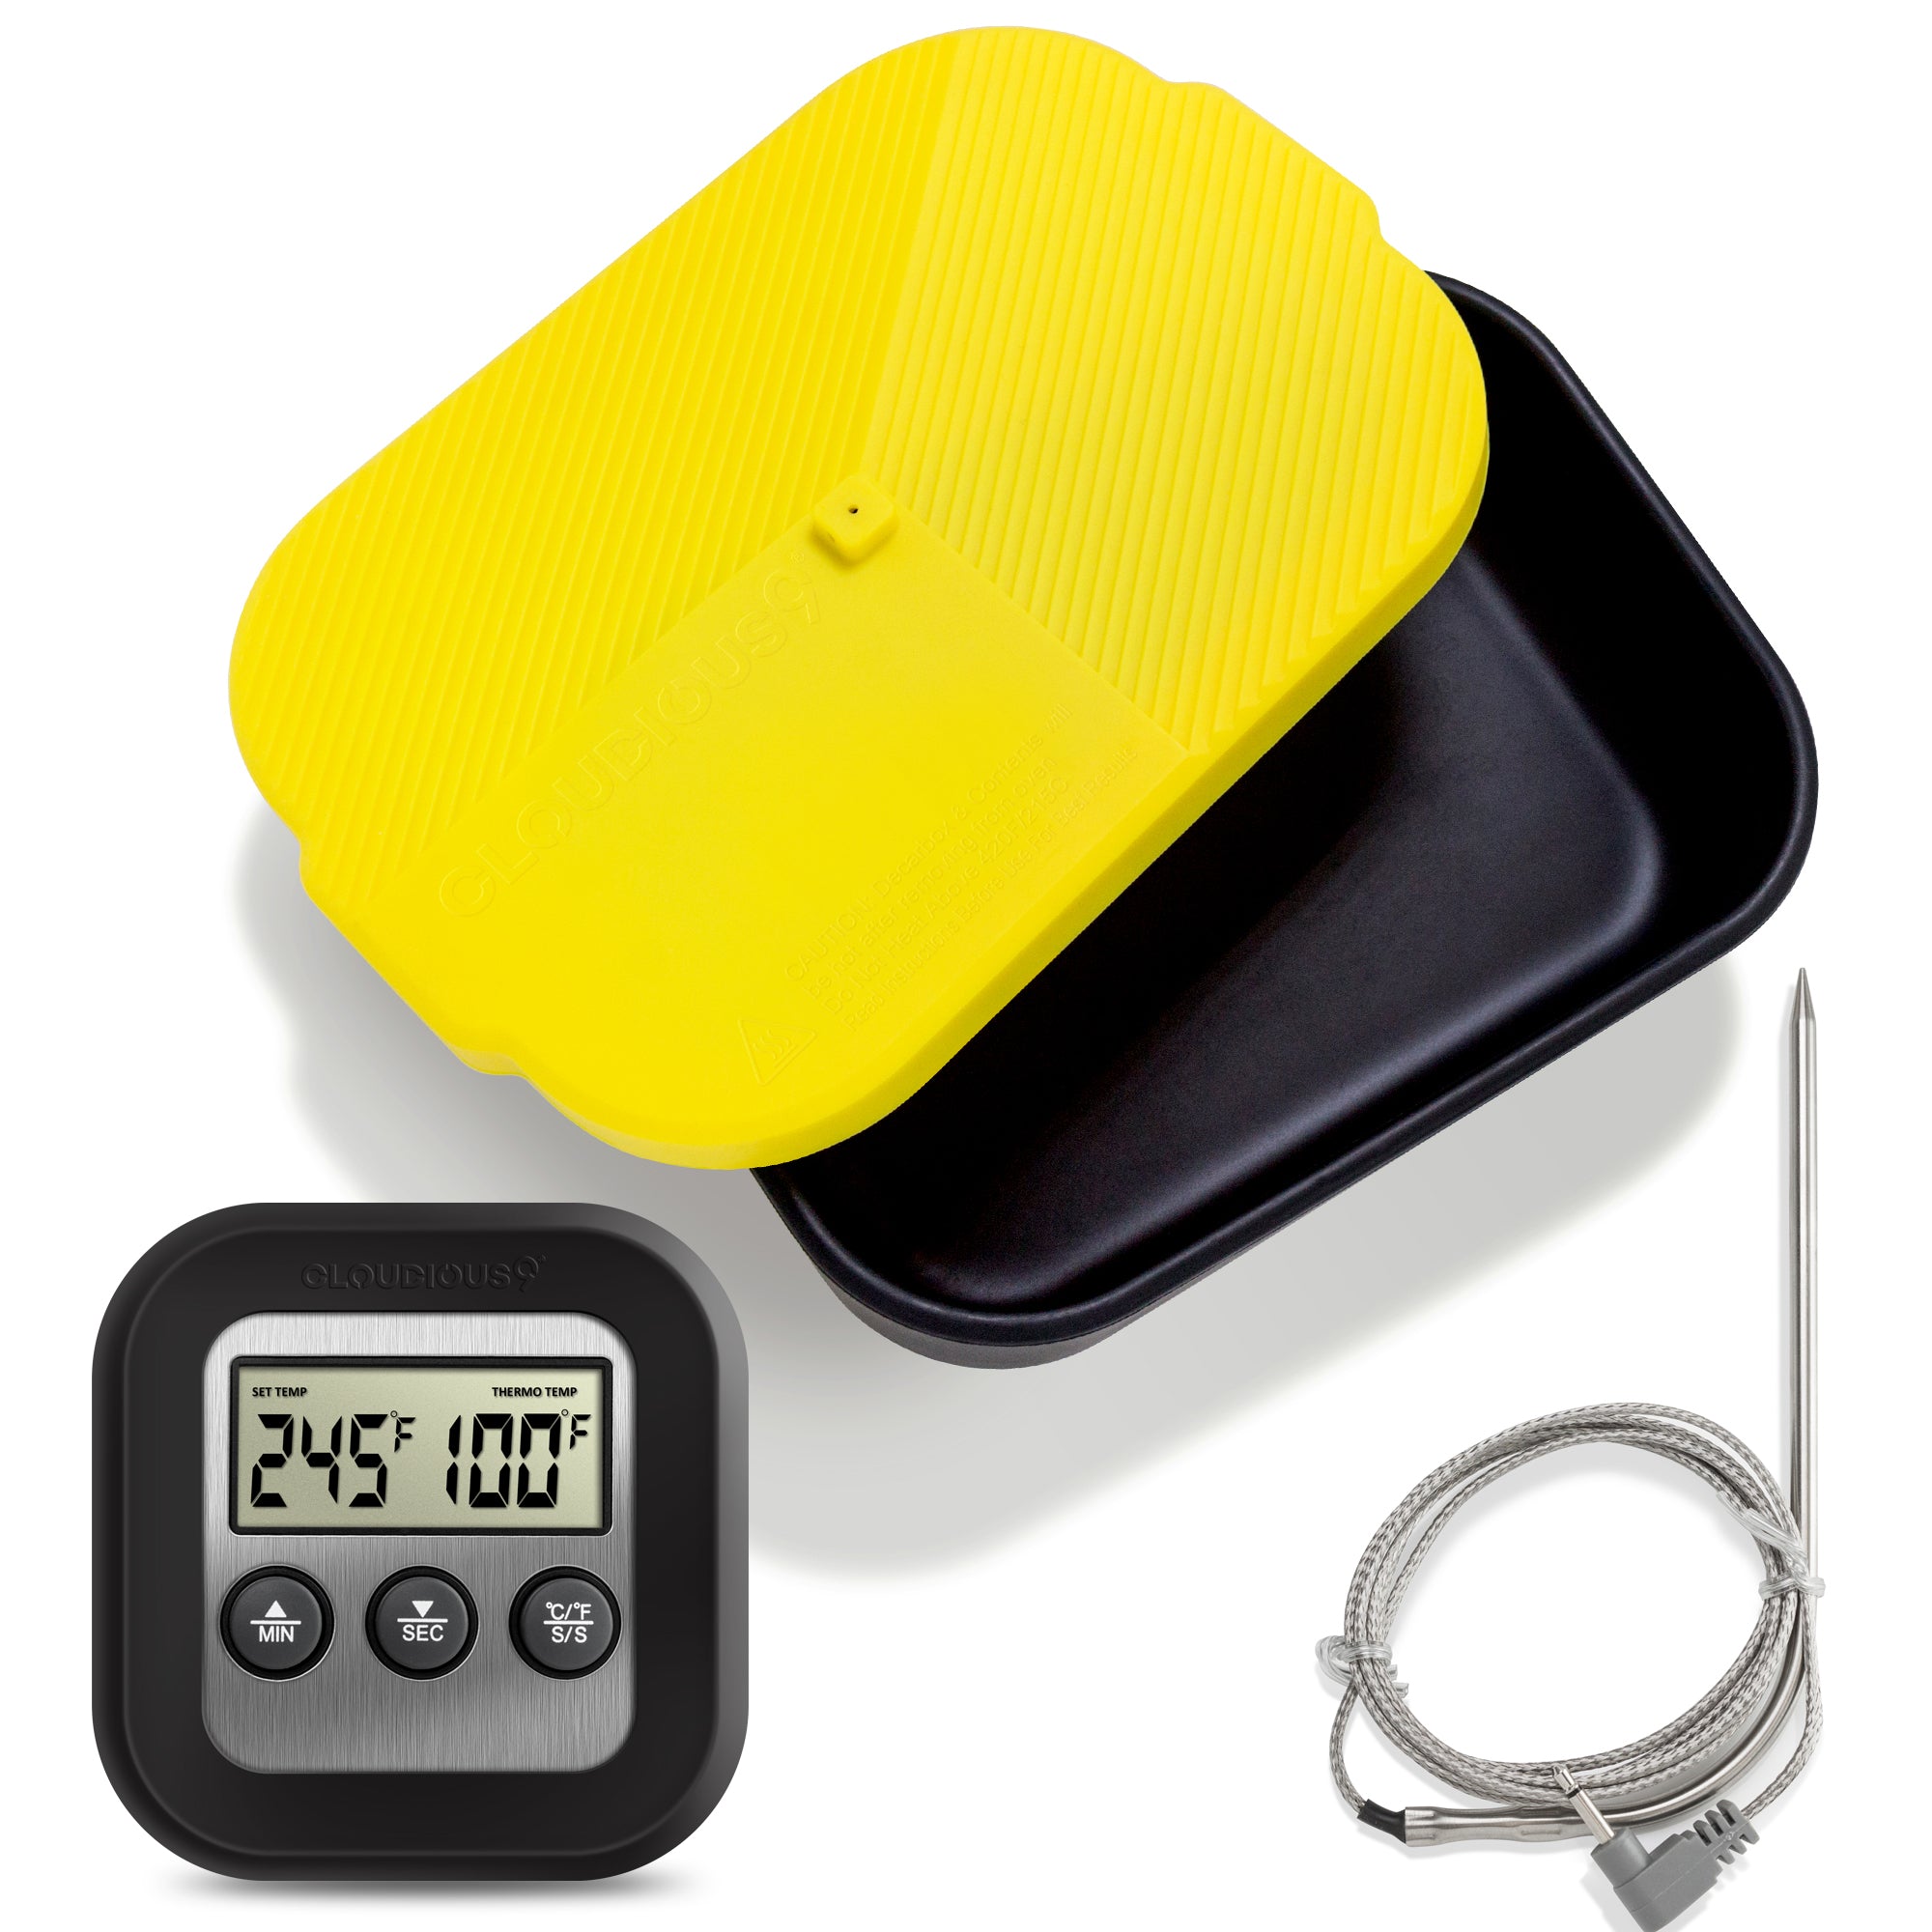 A black and yellow box with an insertable digital thermometer used for decarboxylation